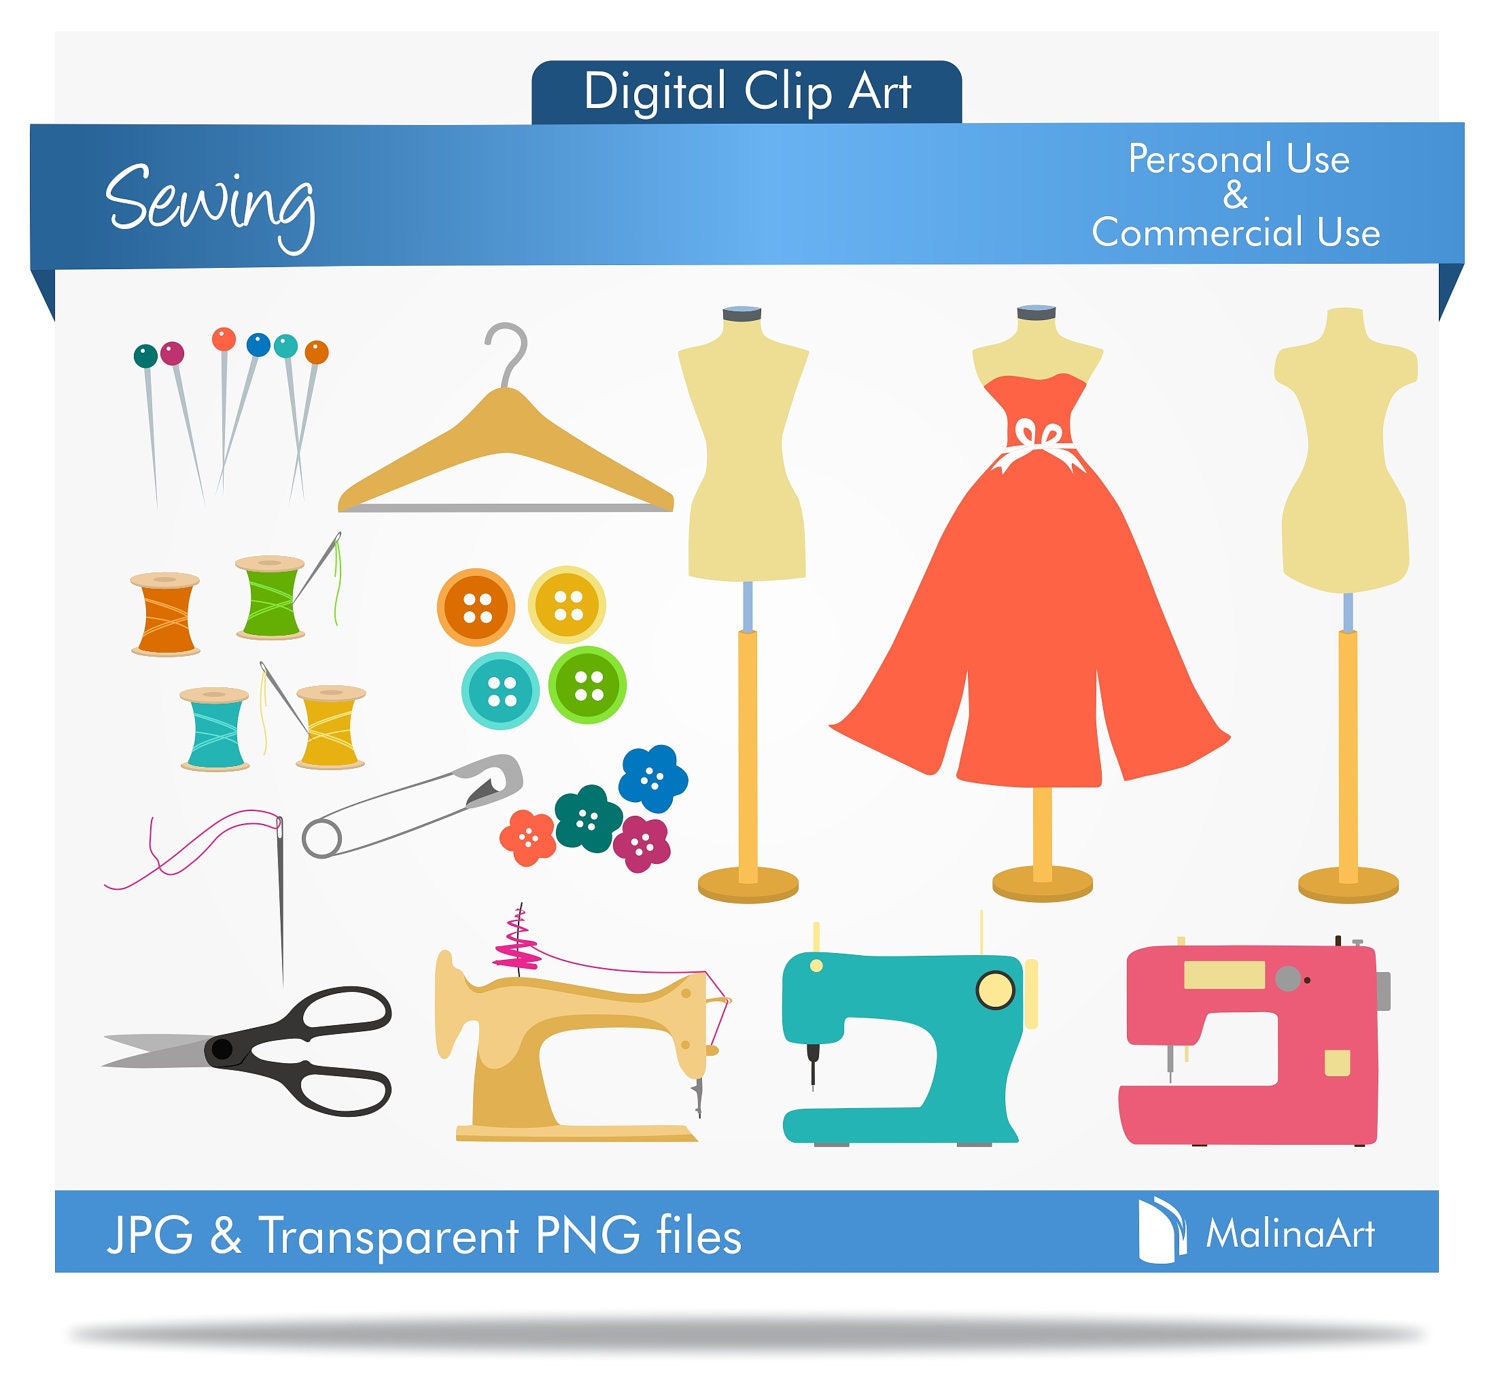 embroidery clipart sites - photo #46